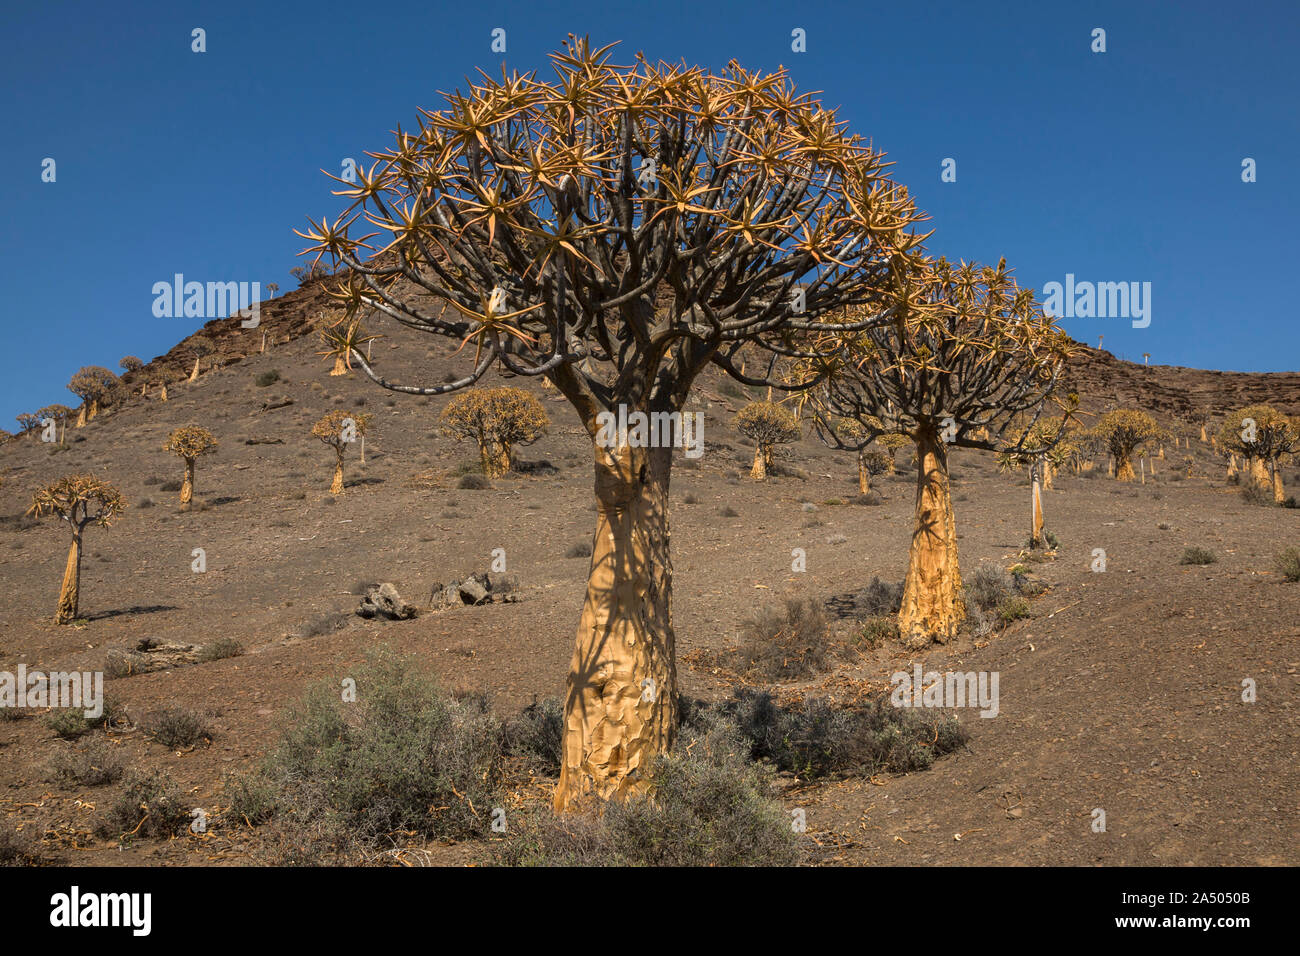 Faretra tree (Aloidendron dichotomum), vicino Nieuwoudtville, Northern Cape, Sud Africa Foto Stock